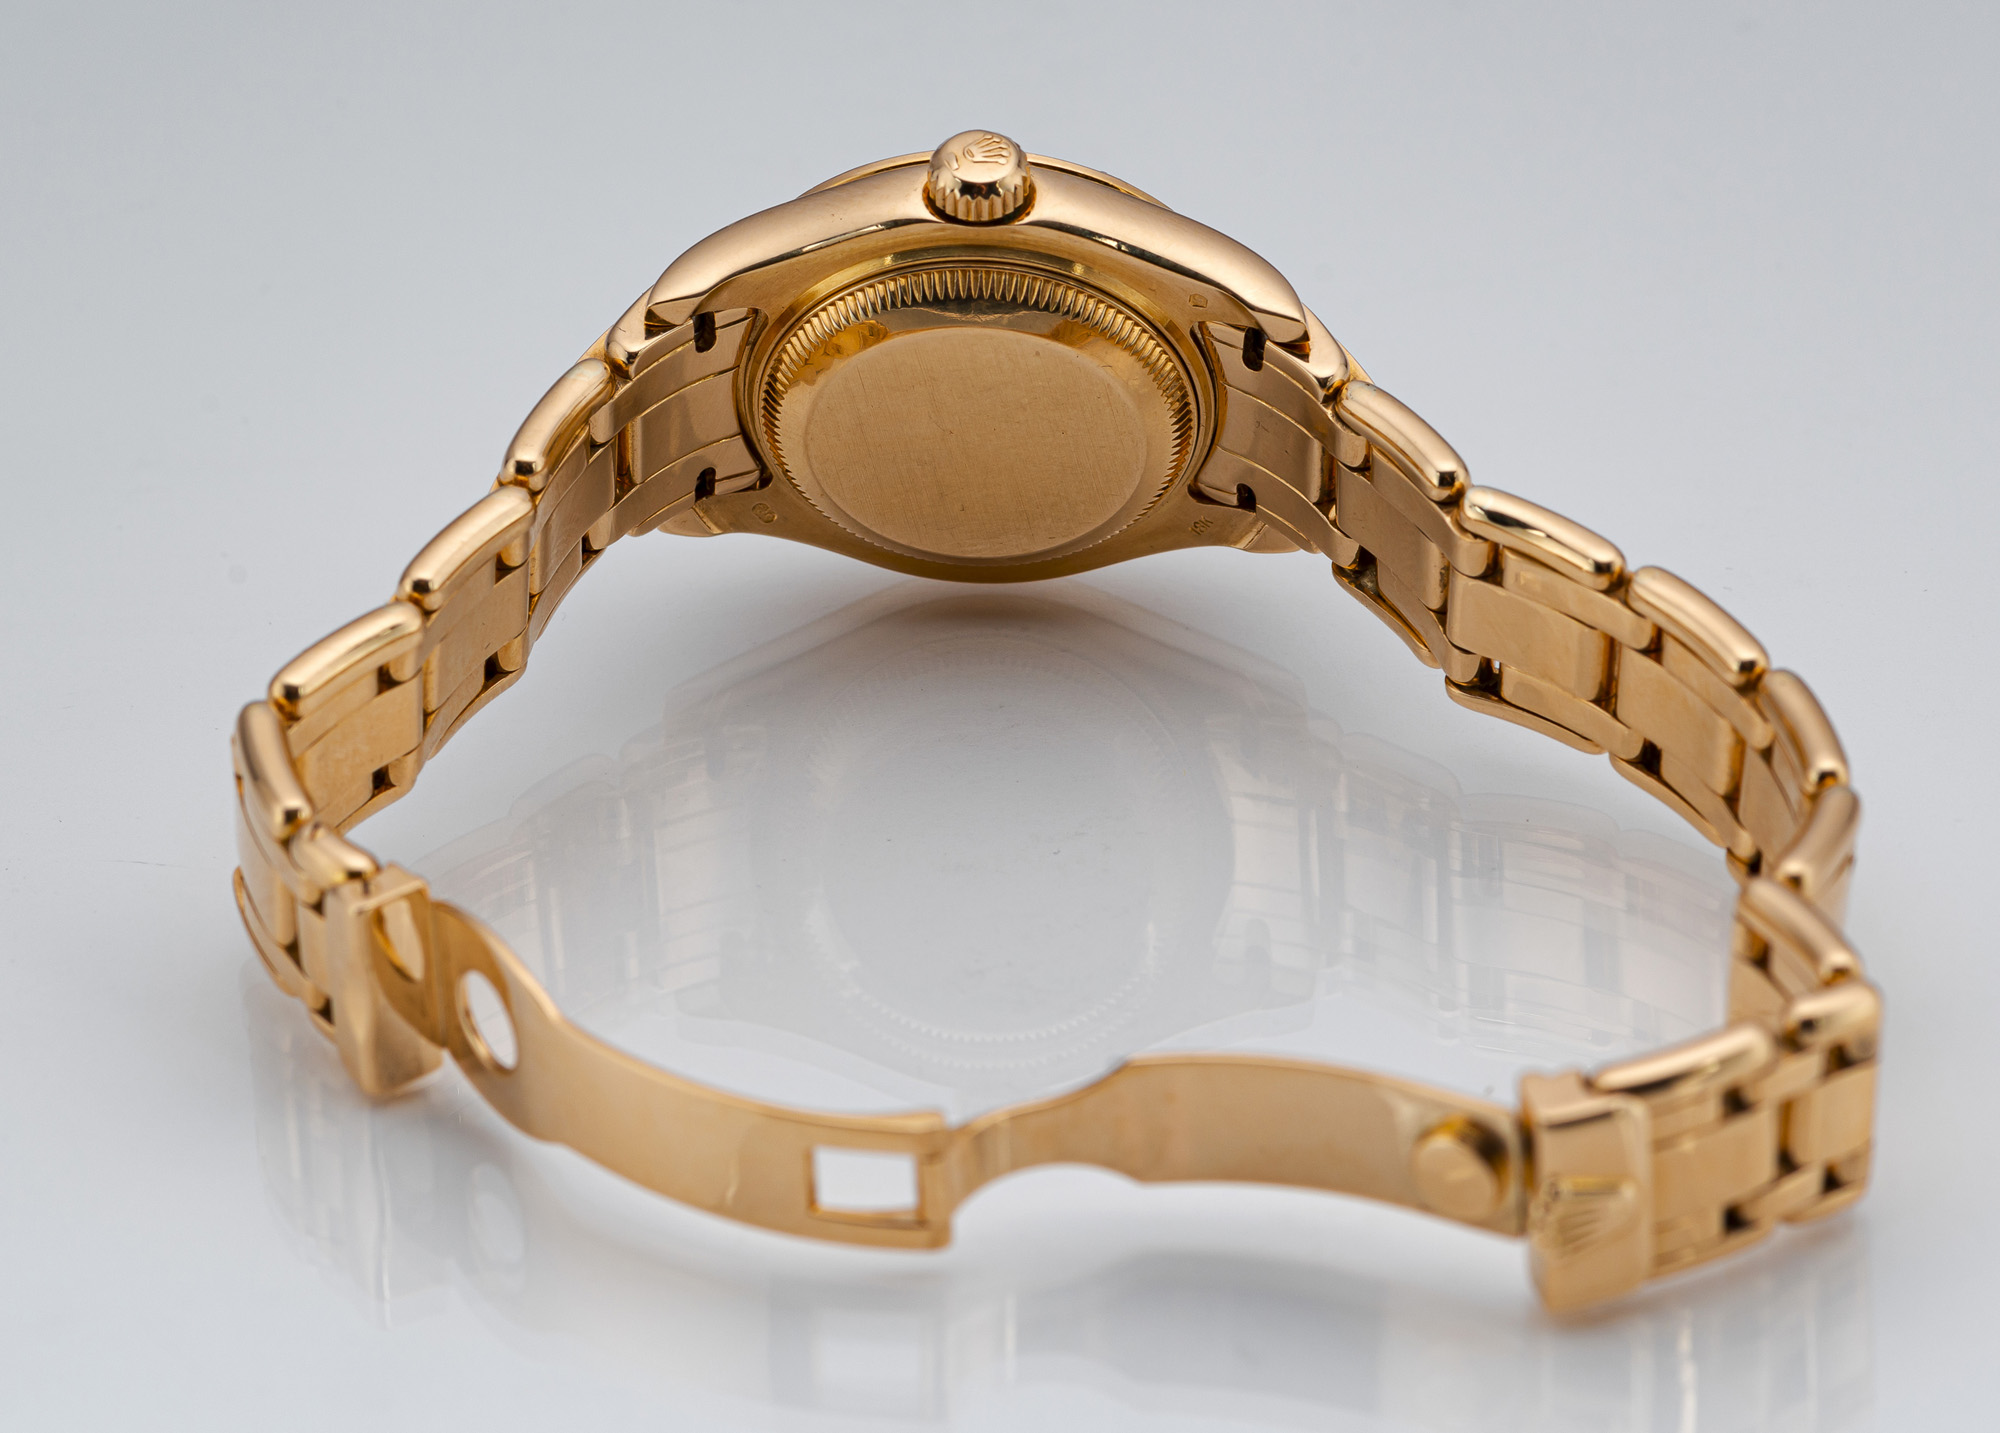 A ROLEX LADY'S WATCH - Image 3 of 5